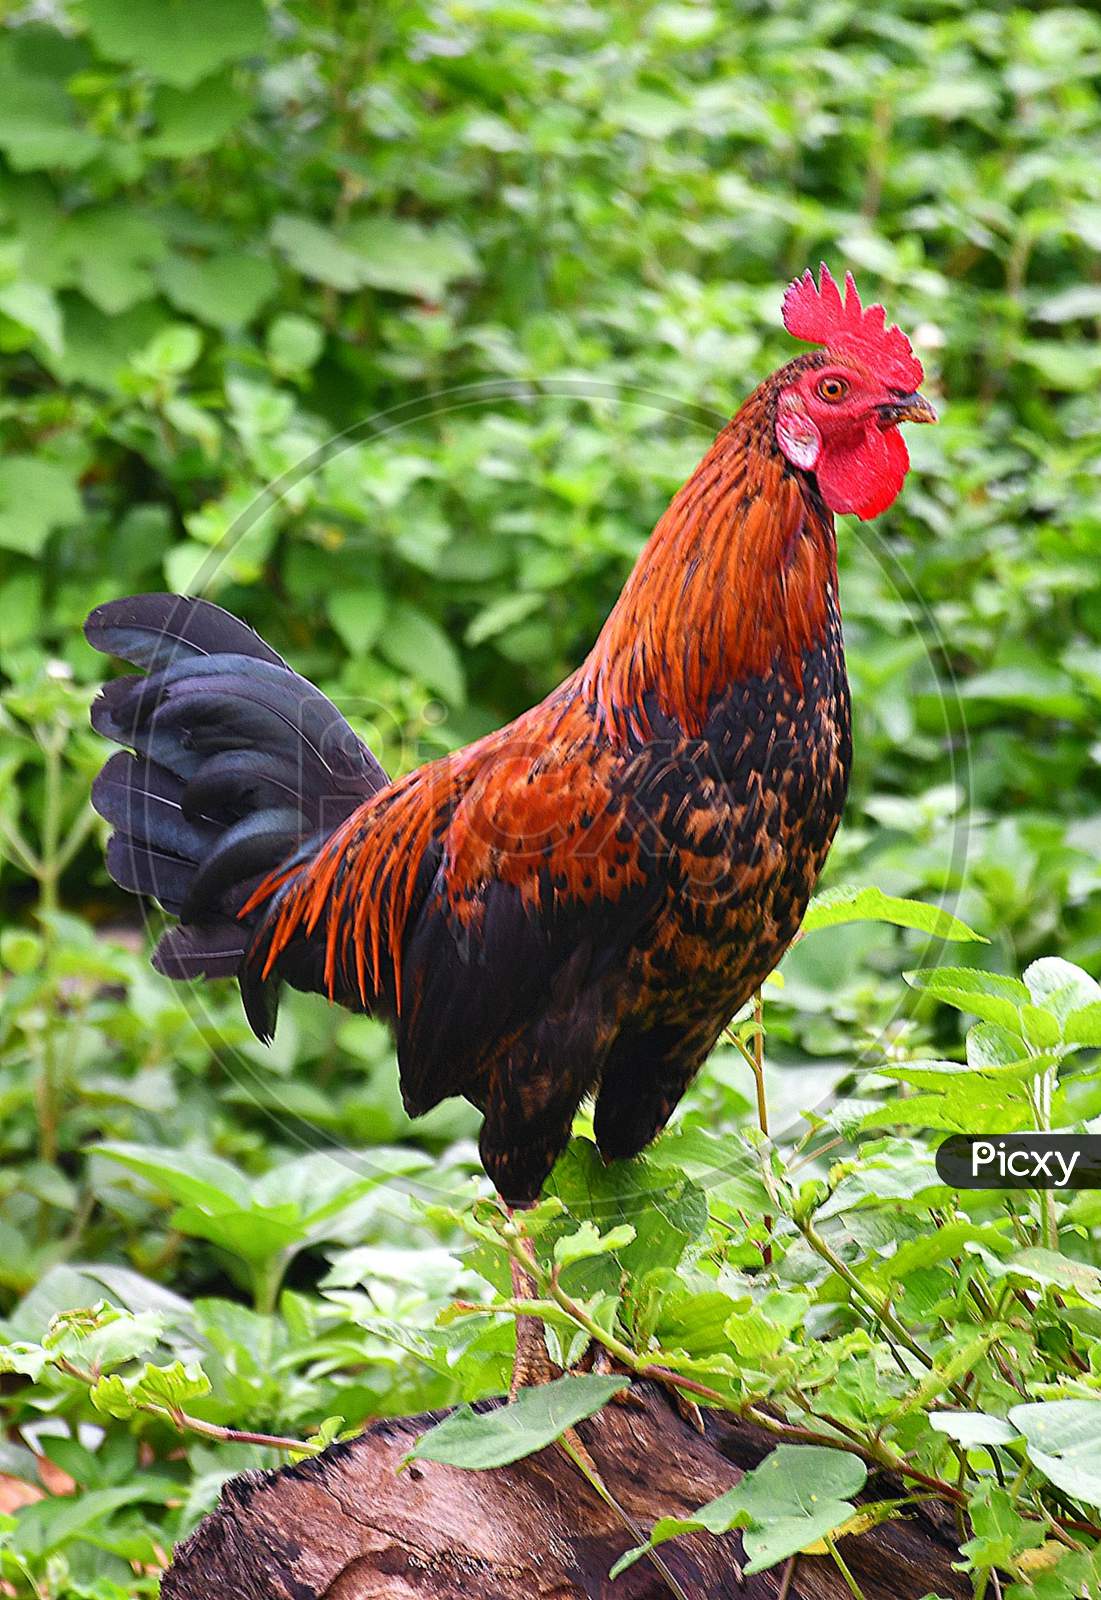 Rooster Sitting In A Green Garden. Capture From Away with Background blur.